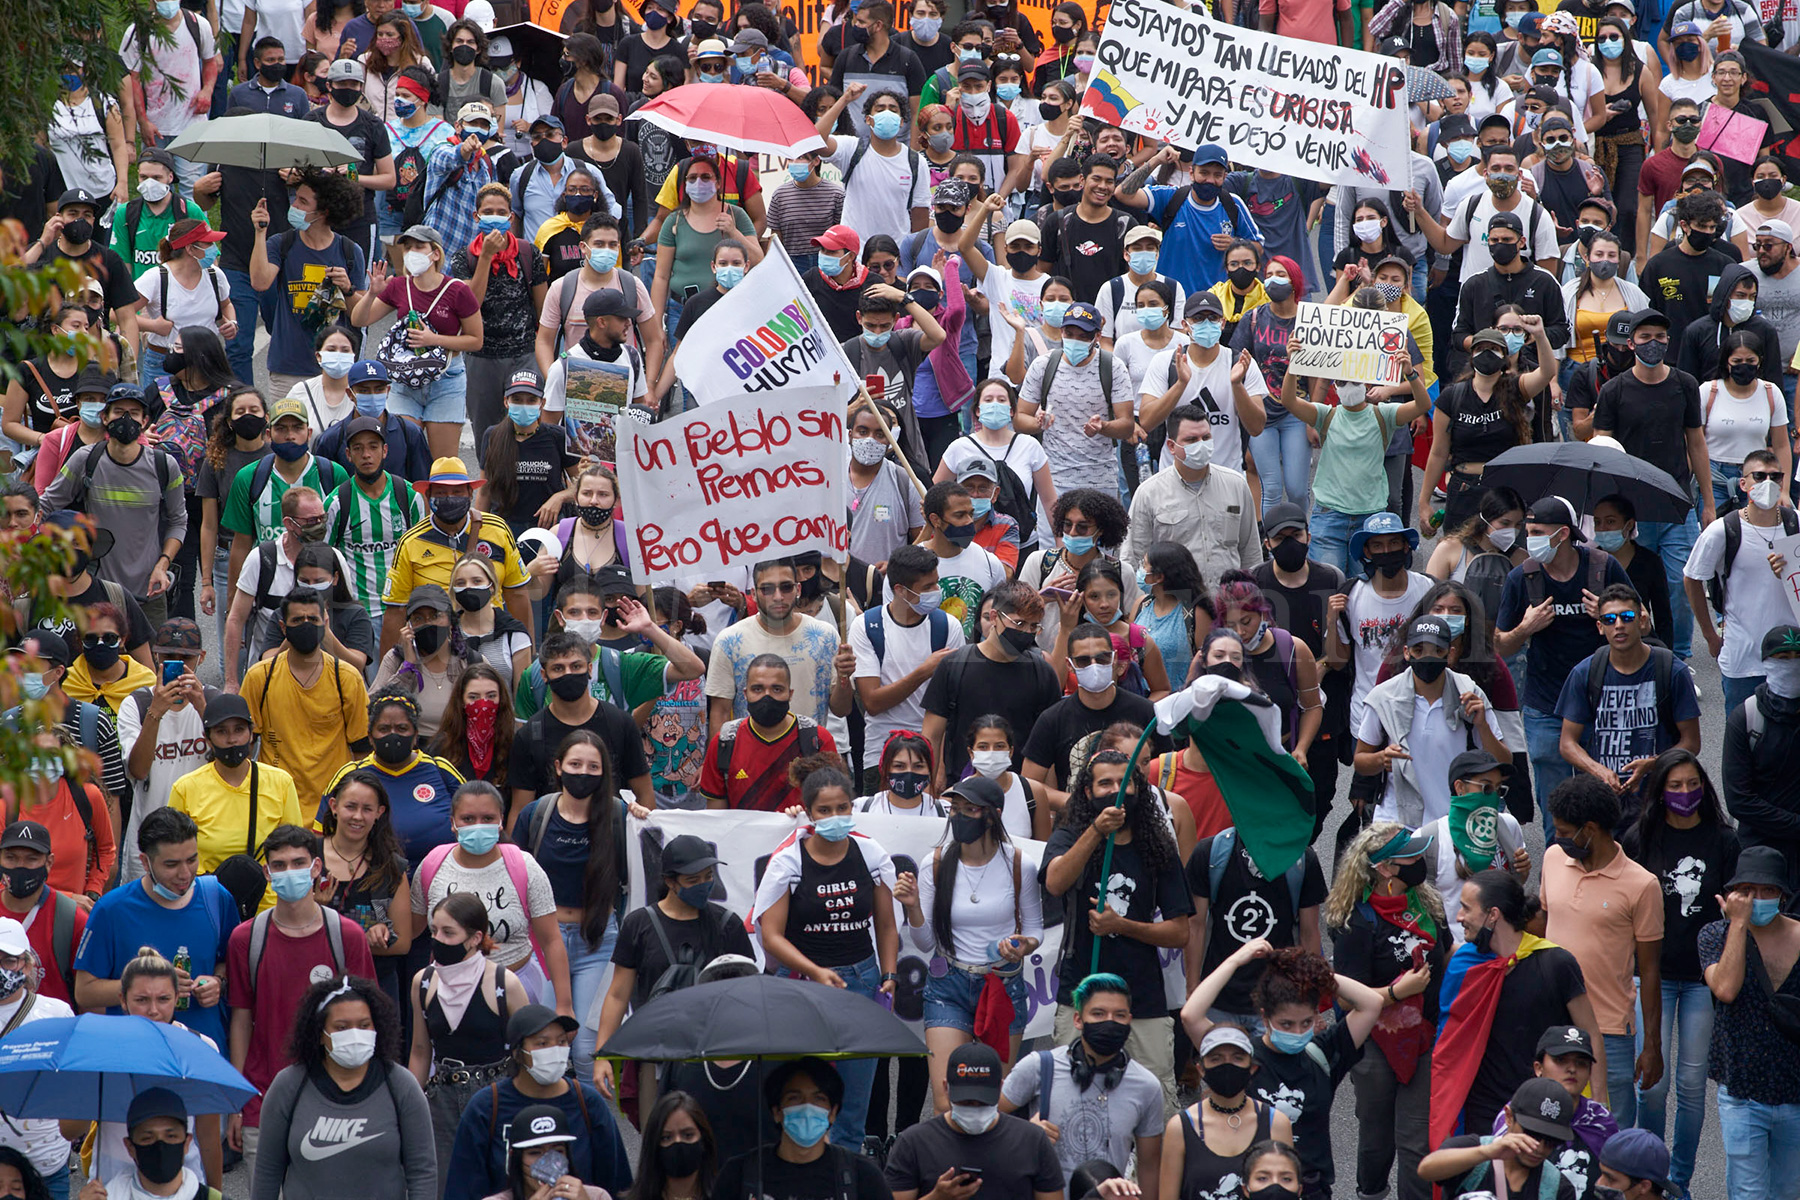 Crowds demonstrate against government of Duque in Medellín